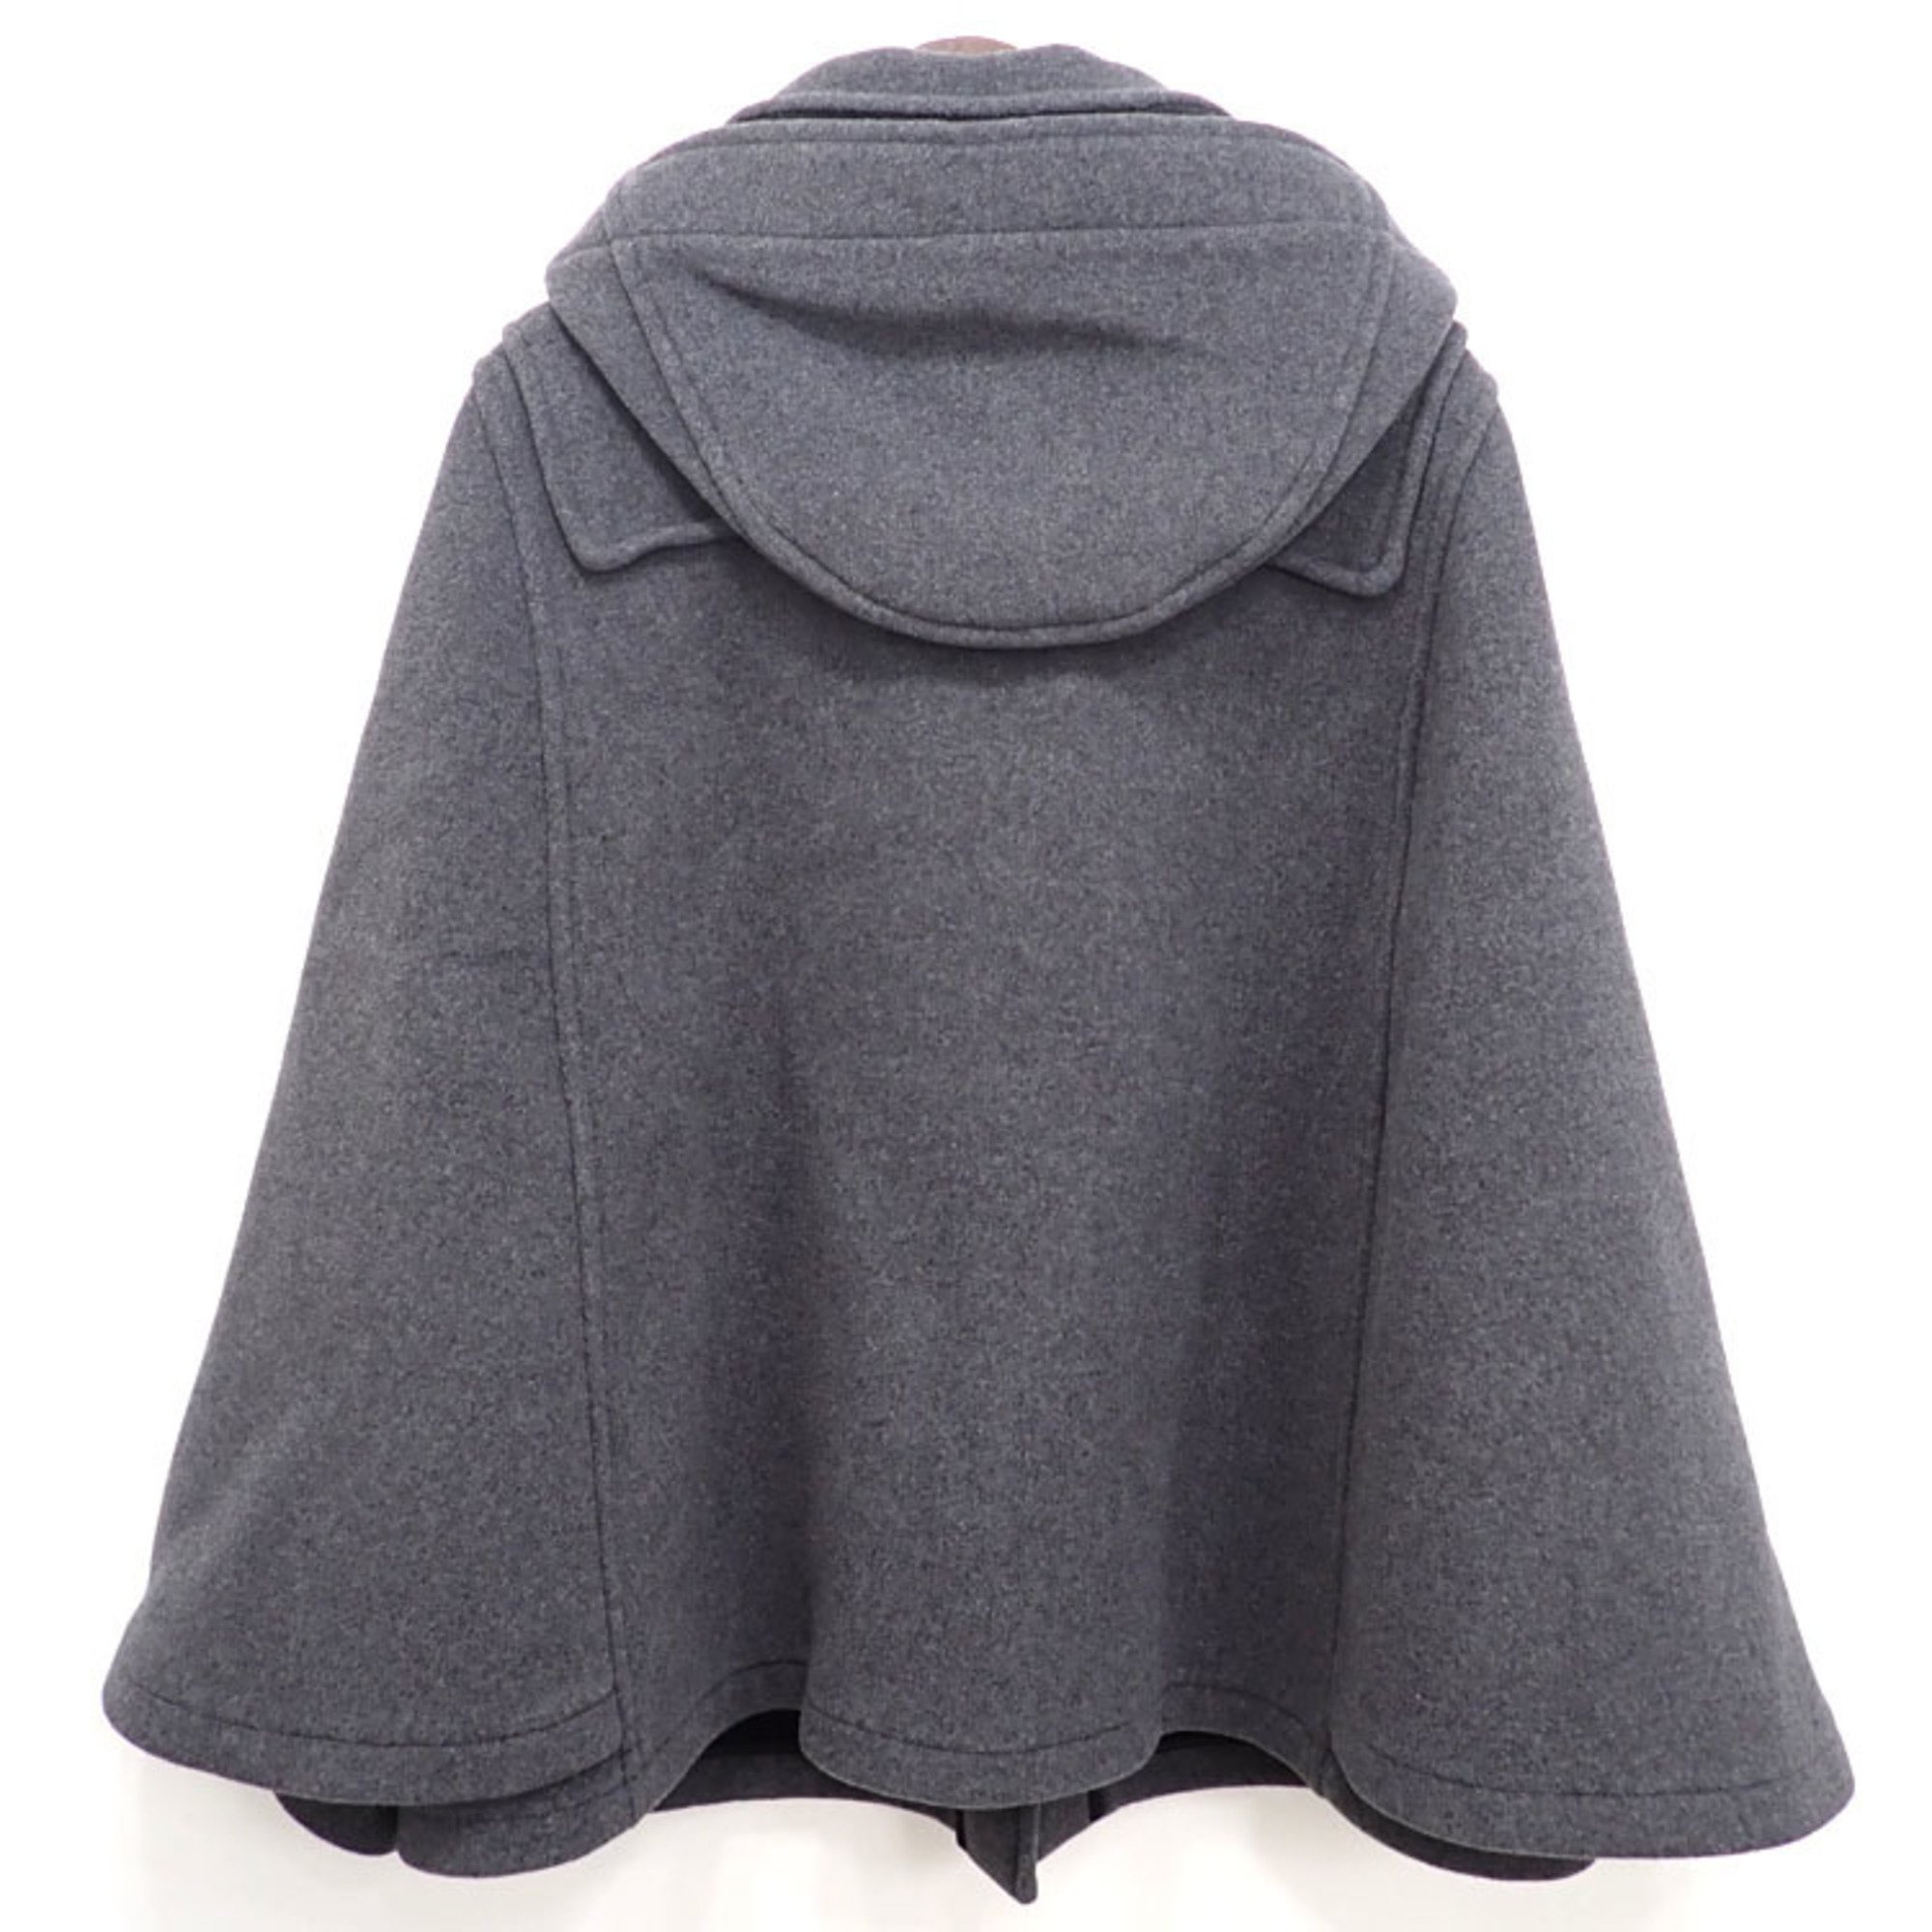 Gloverall Poncho Women's Wool and Others Gray XL Size LS6002CT-ACP Cape Clothes